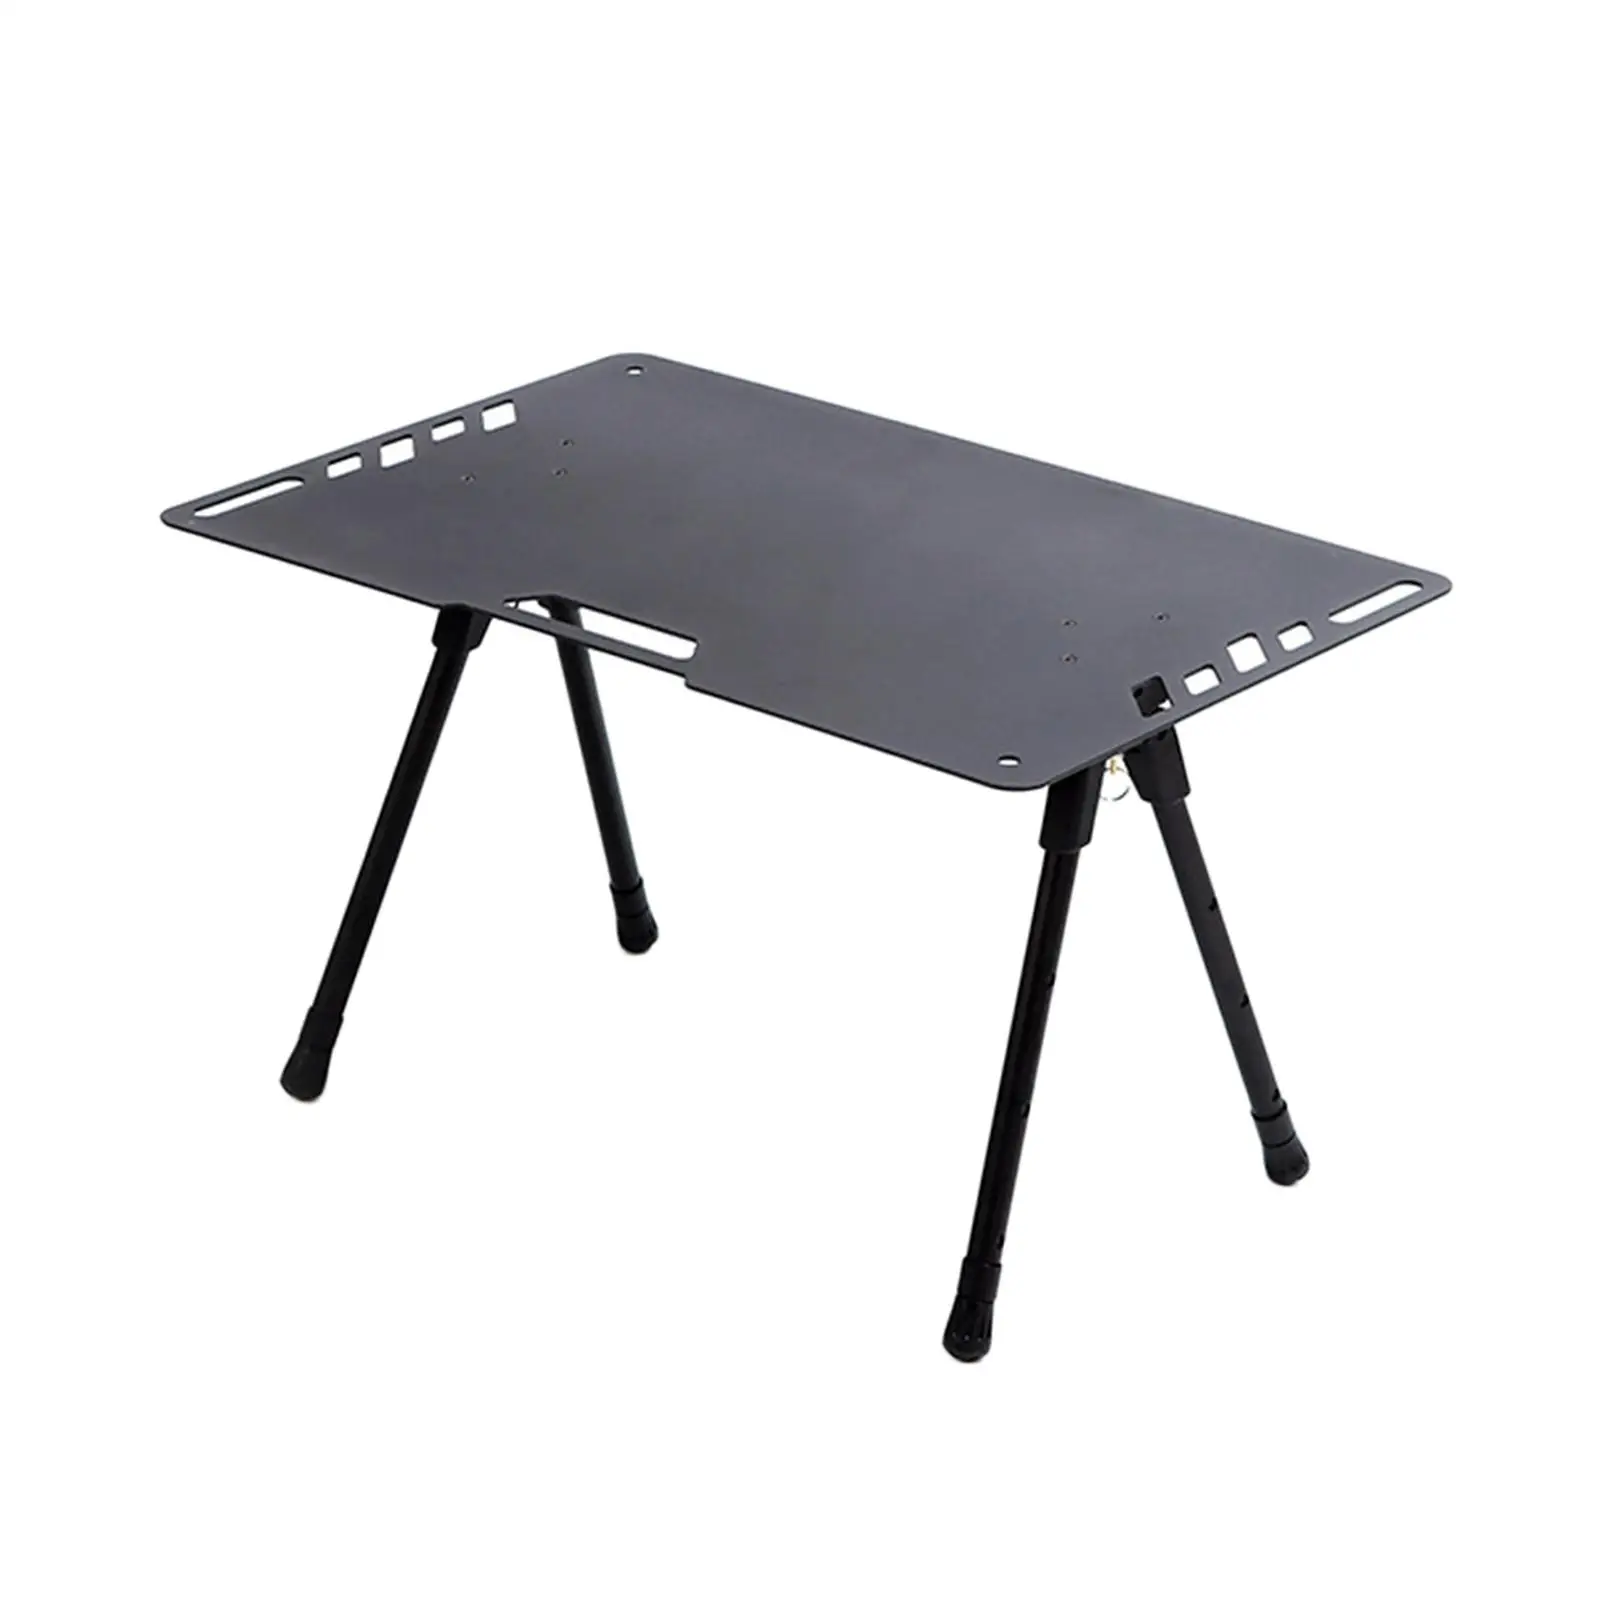 Camping Folding Tables Grill Outdoor Fishing Cook BBQ Portable Beach Table